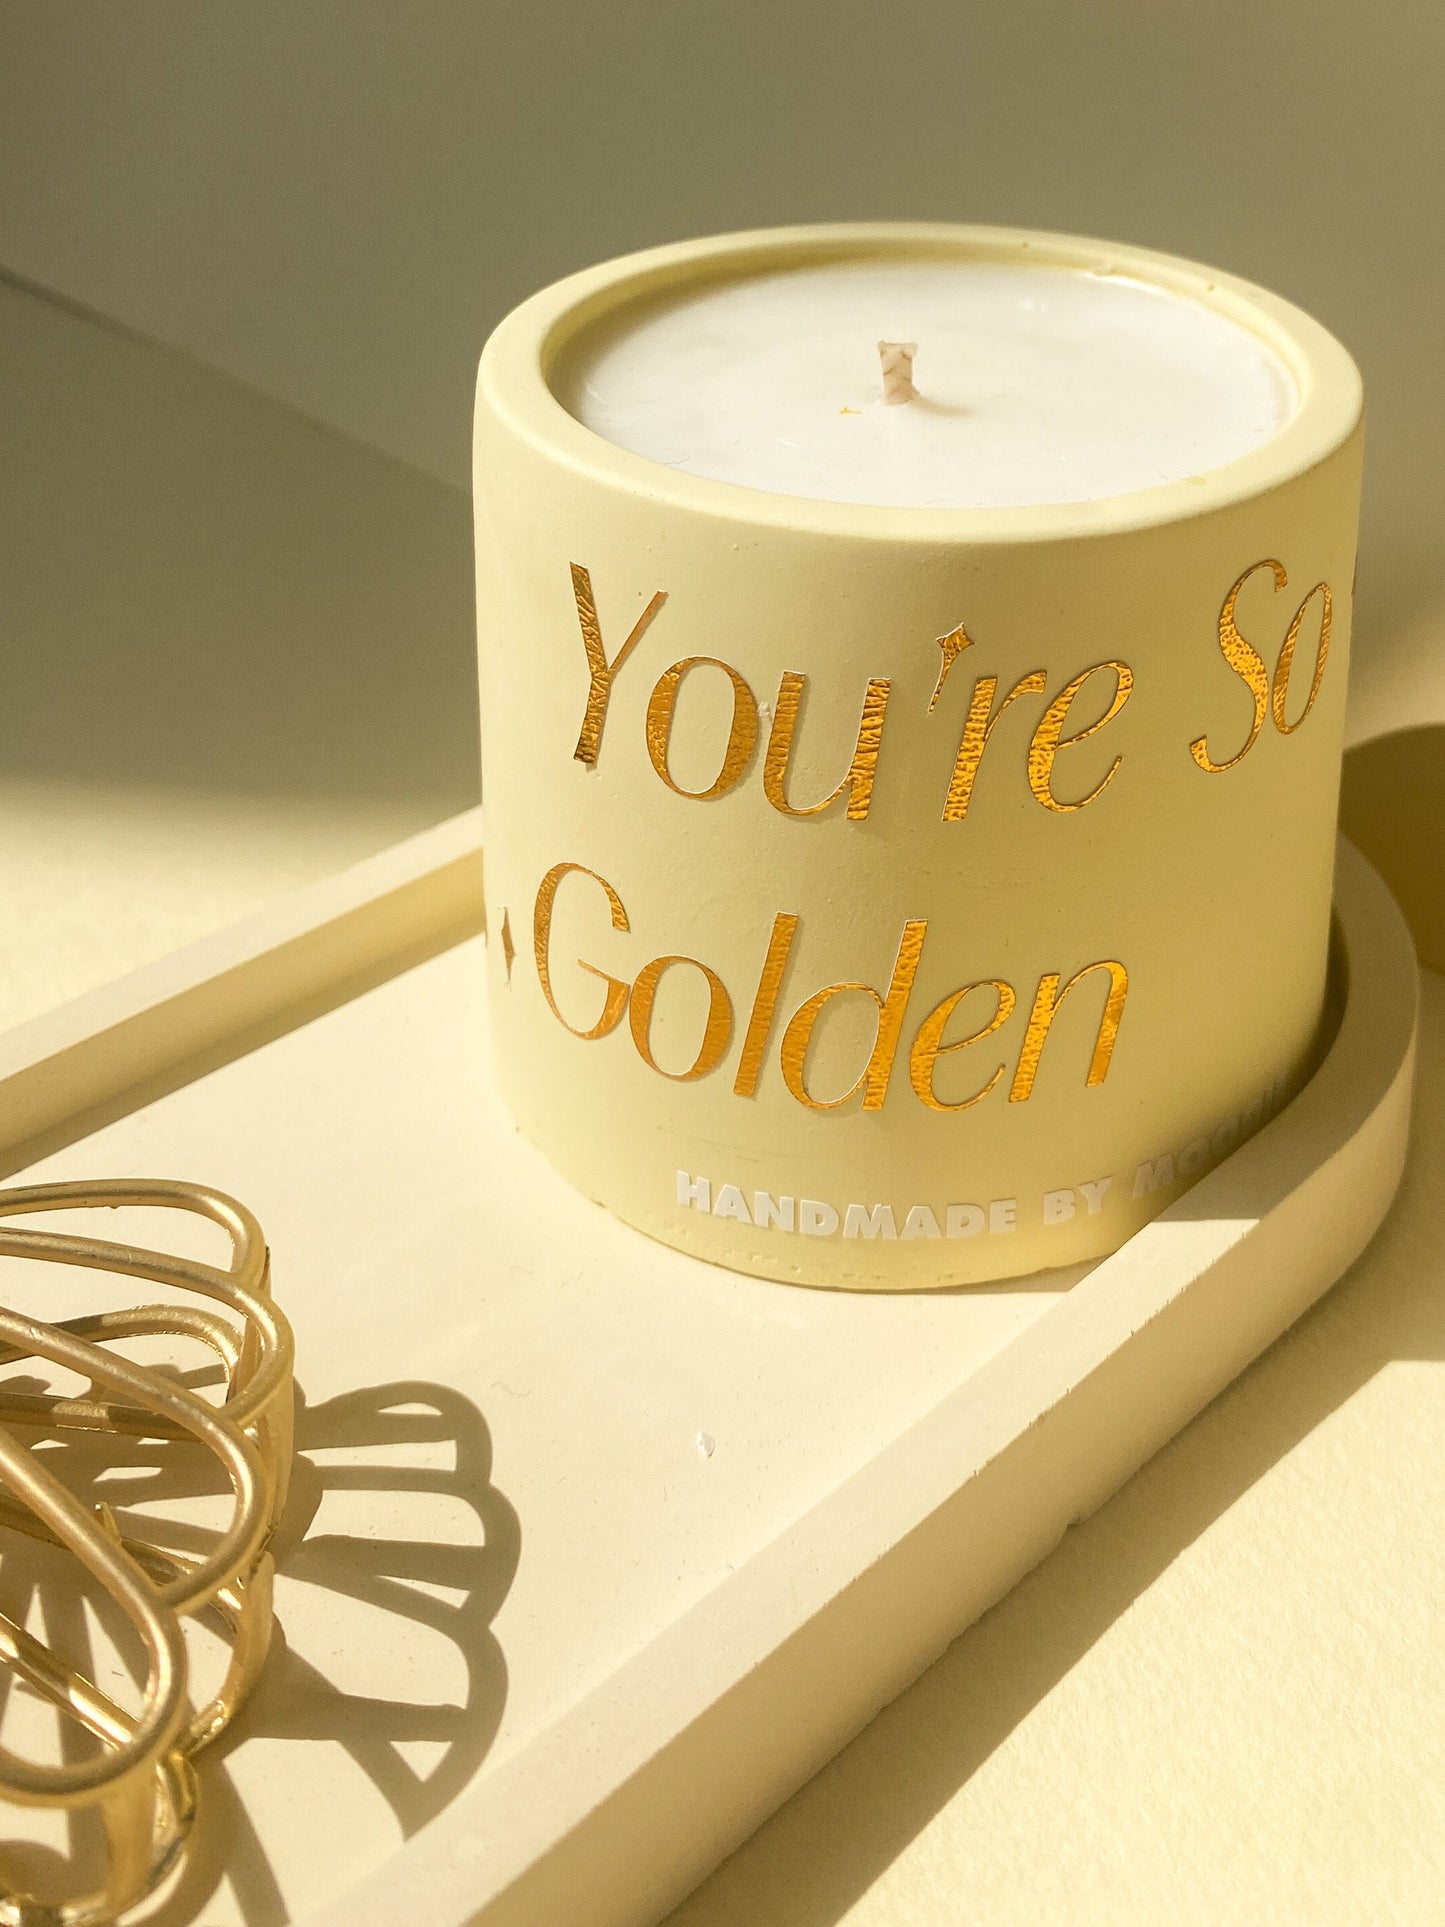 Super Seconds - You're so Golden Premium Soy Blend Candle - WAS £16 NOW £9 - 43% OFF